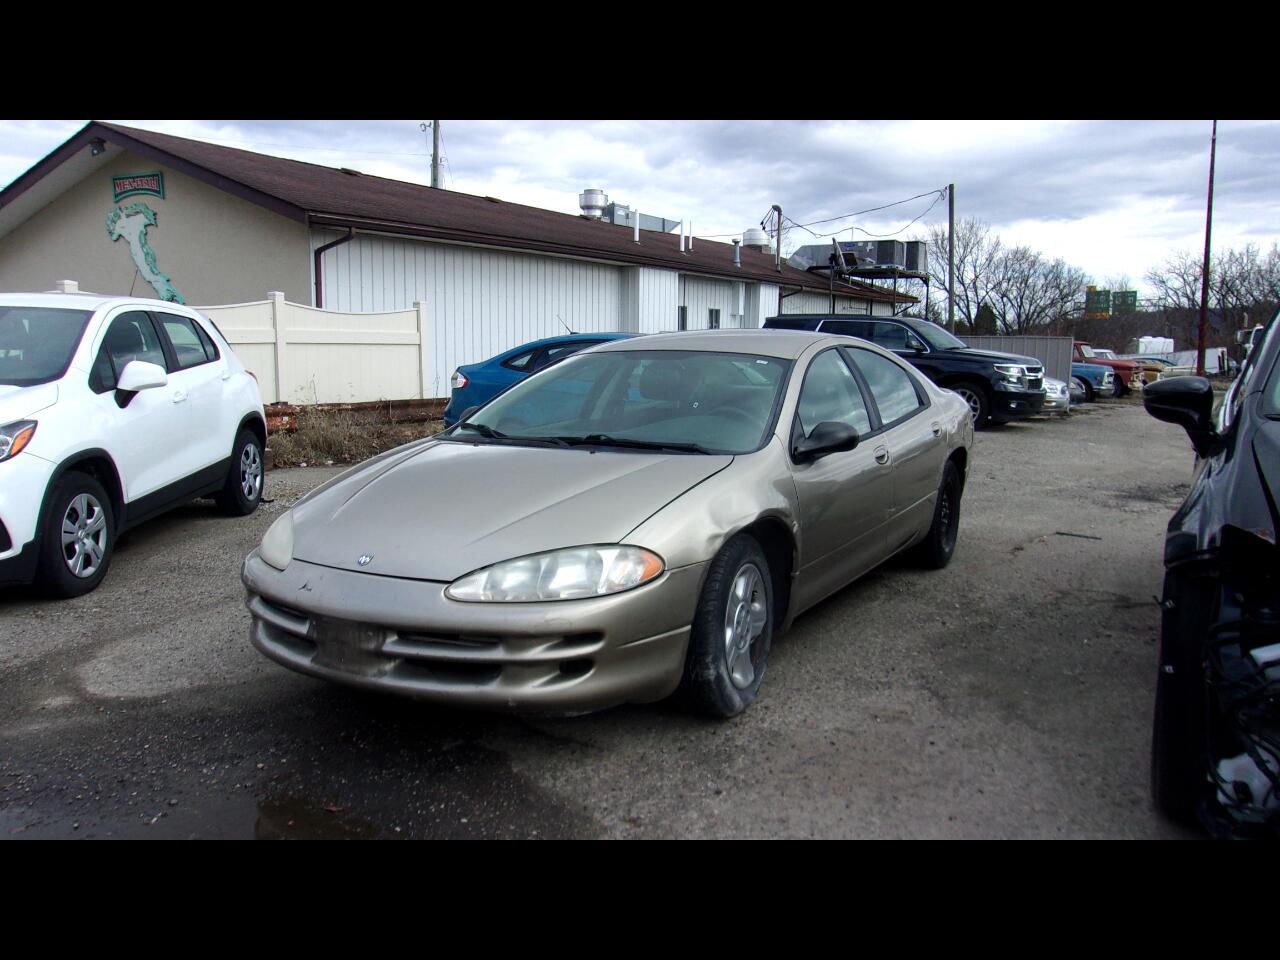 Used 2004 Dodge Intrepid 4dr Sdn SE for Sale in W. Portsmouth OH 45663 239  Auto Group, Inc.